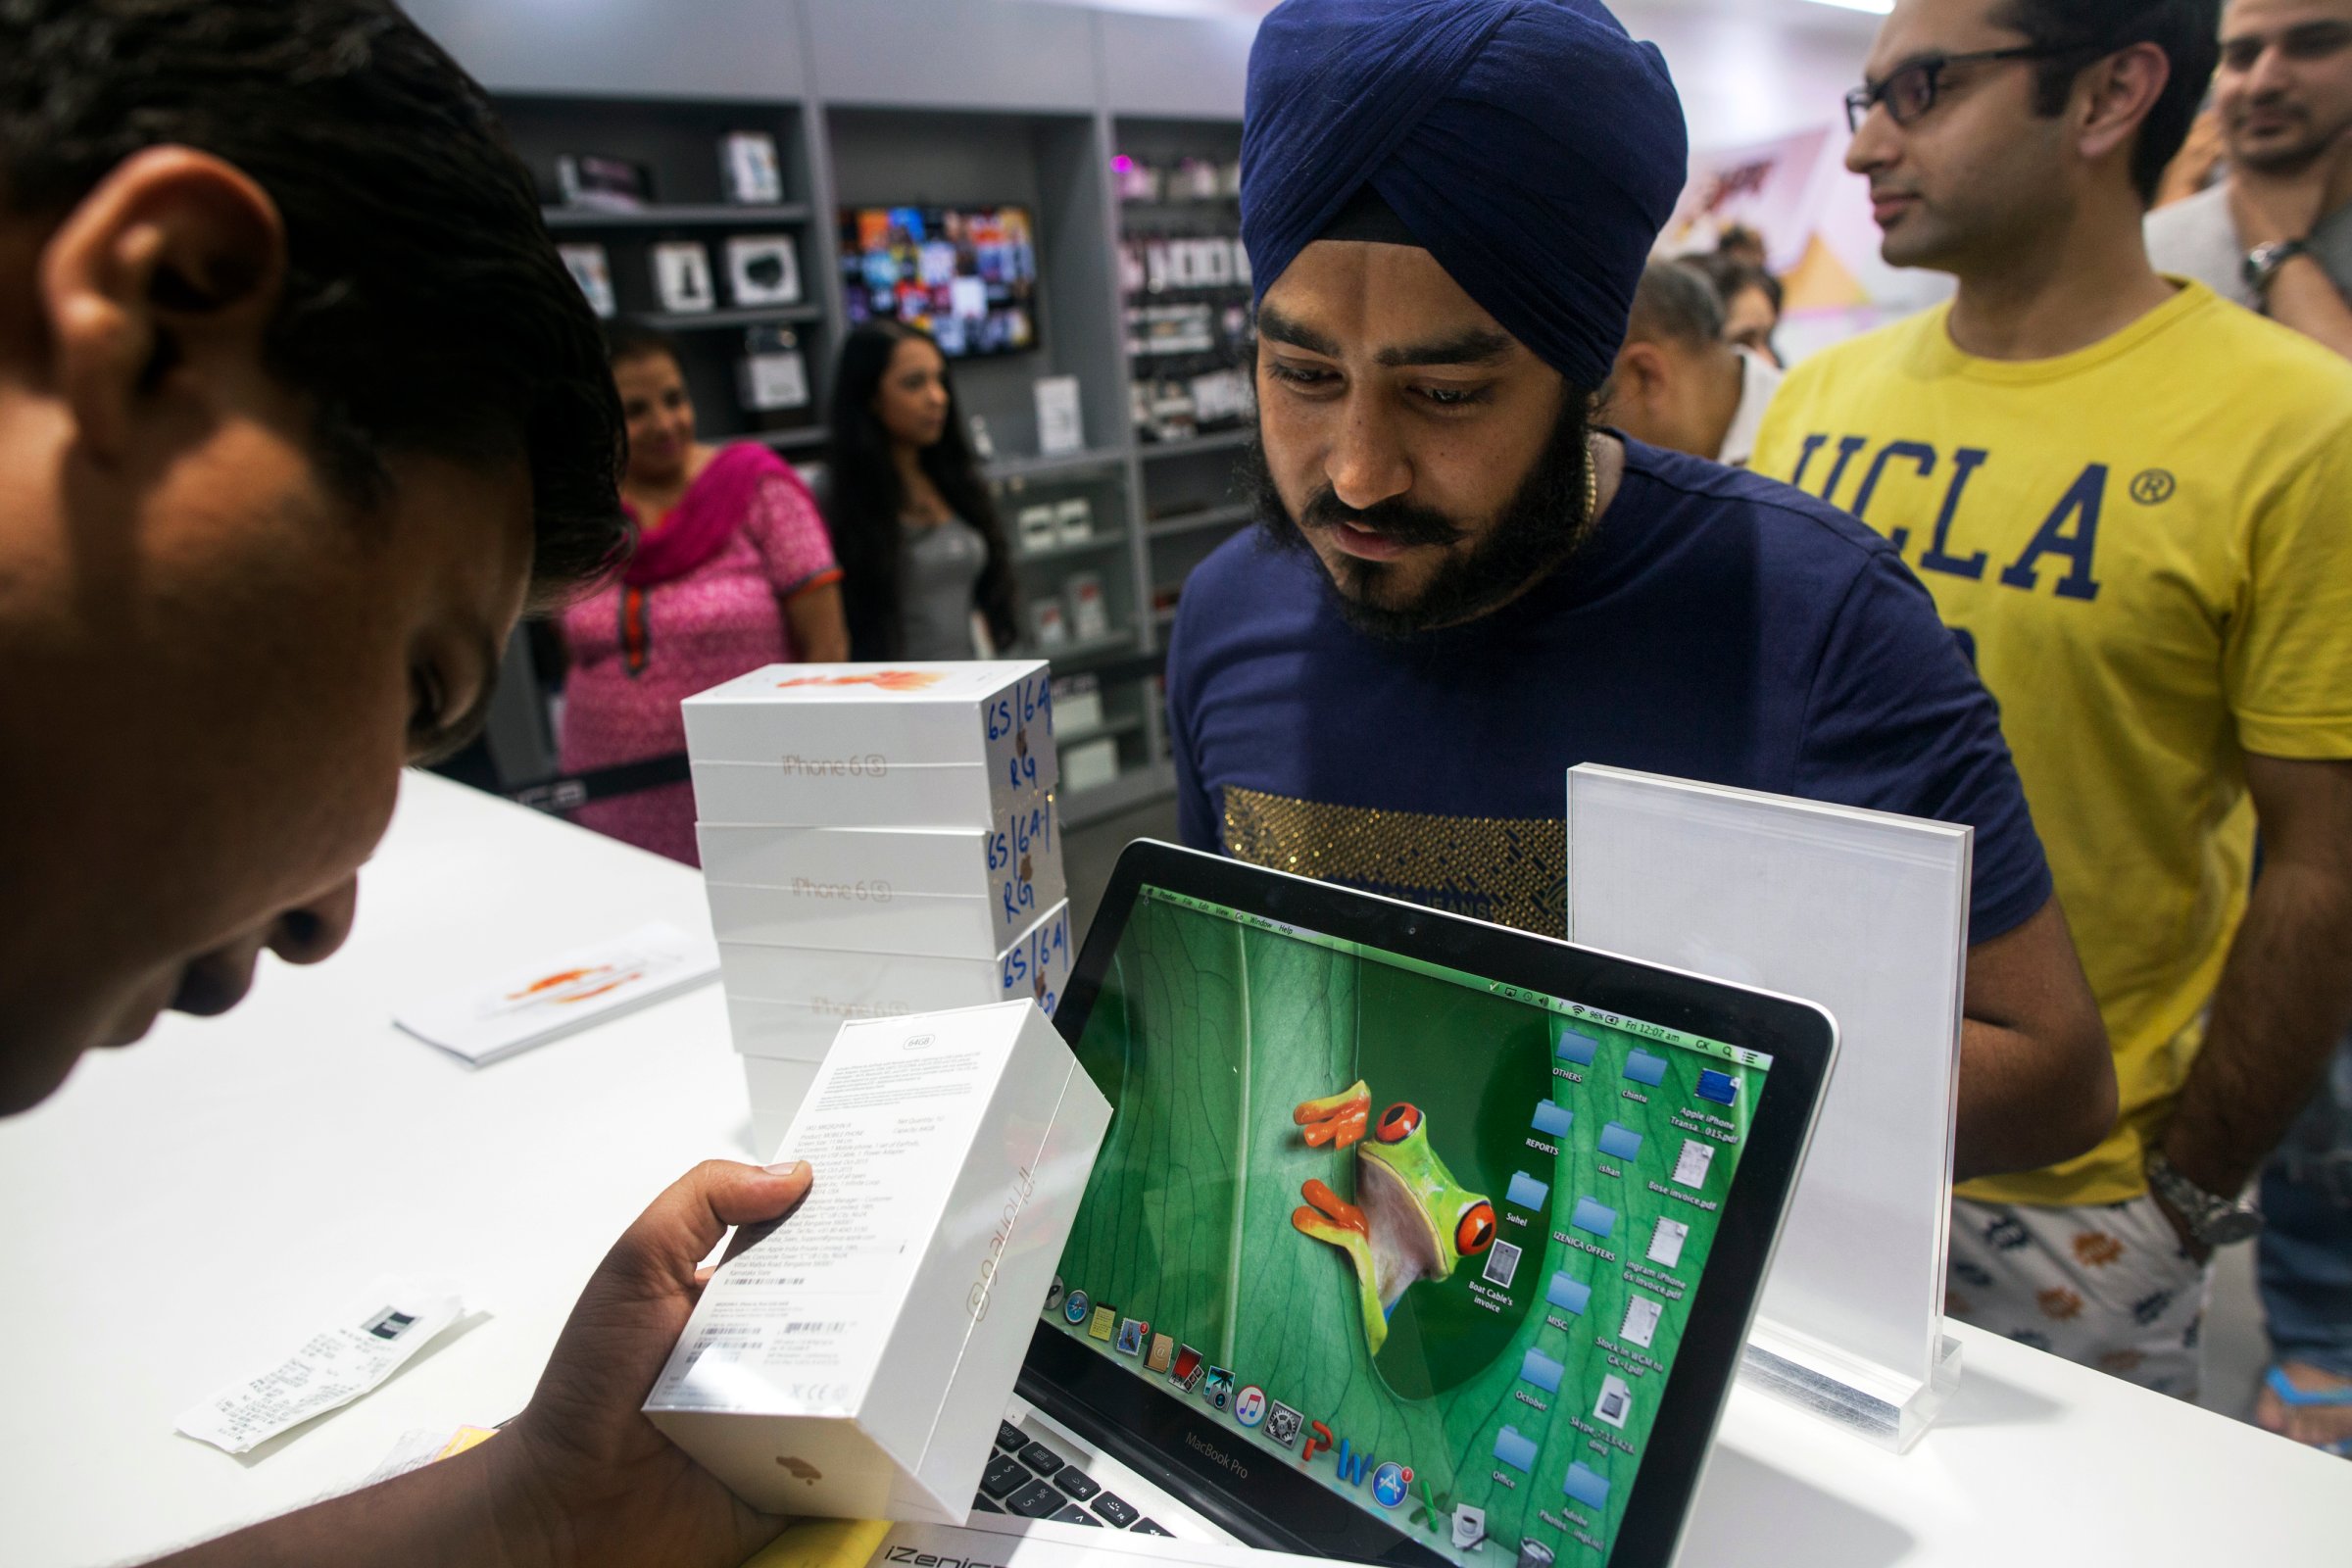 First Purchases Of The Apple IPhone 6s At An Izenica Store As New IPhones Are Released In India